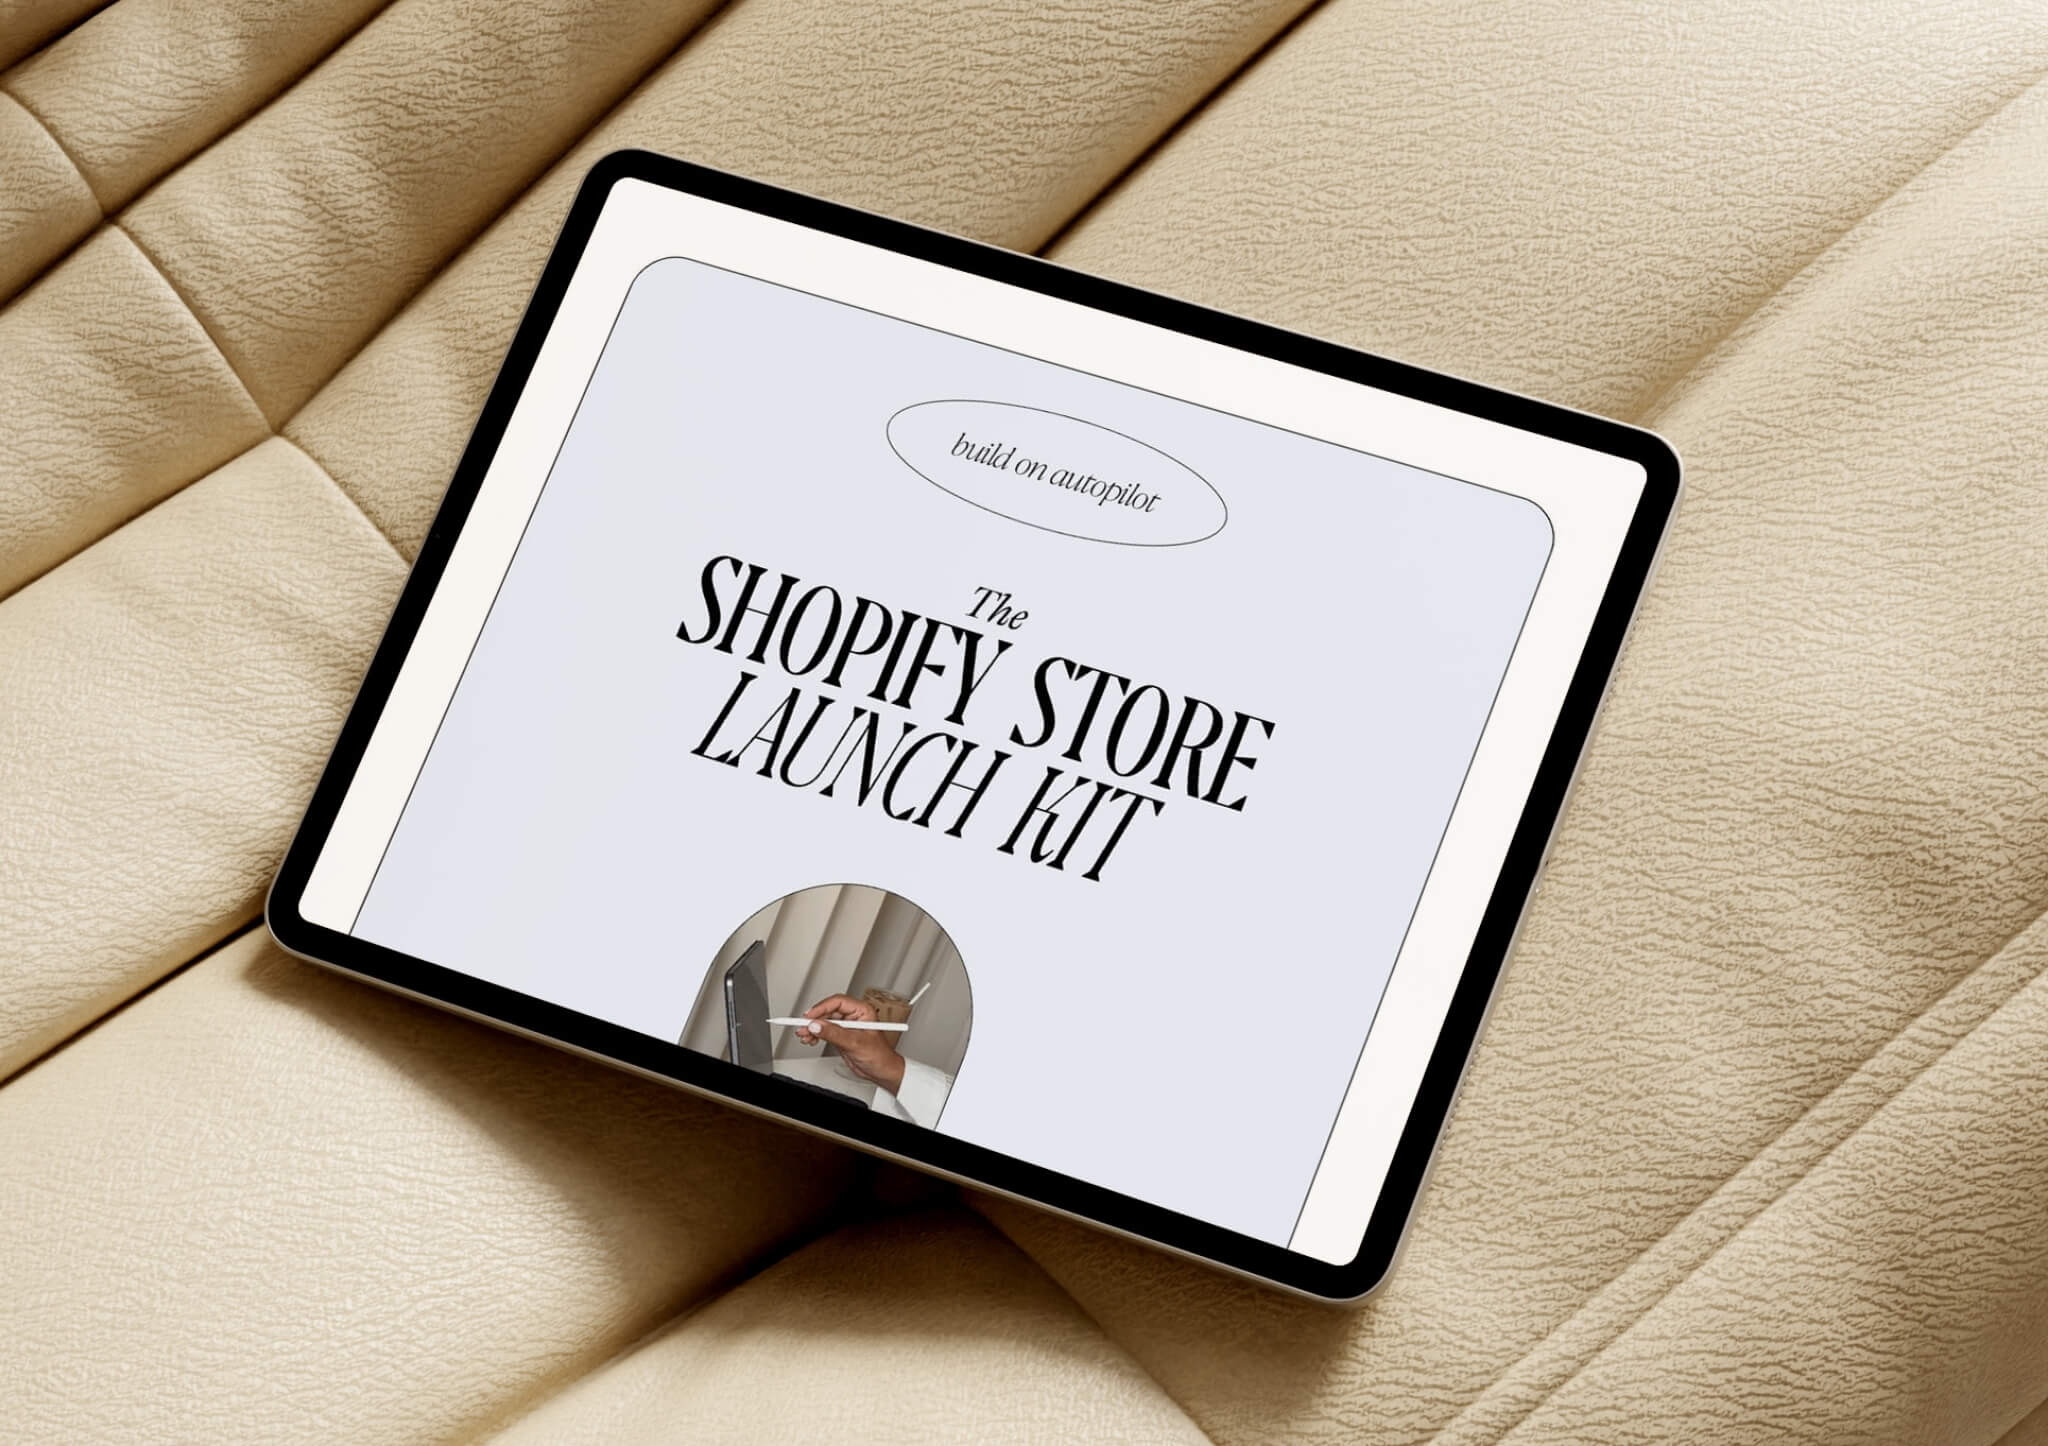 For Web Designers: The Shopify Store Launch Kit